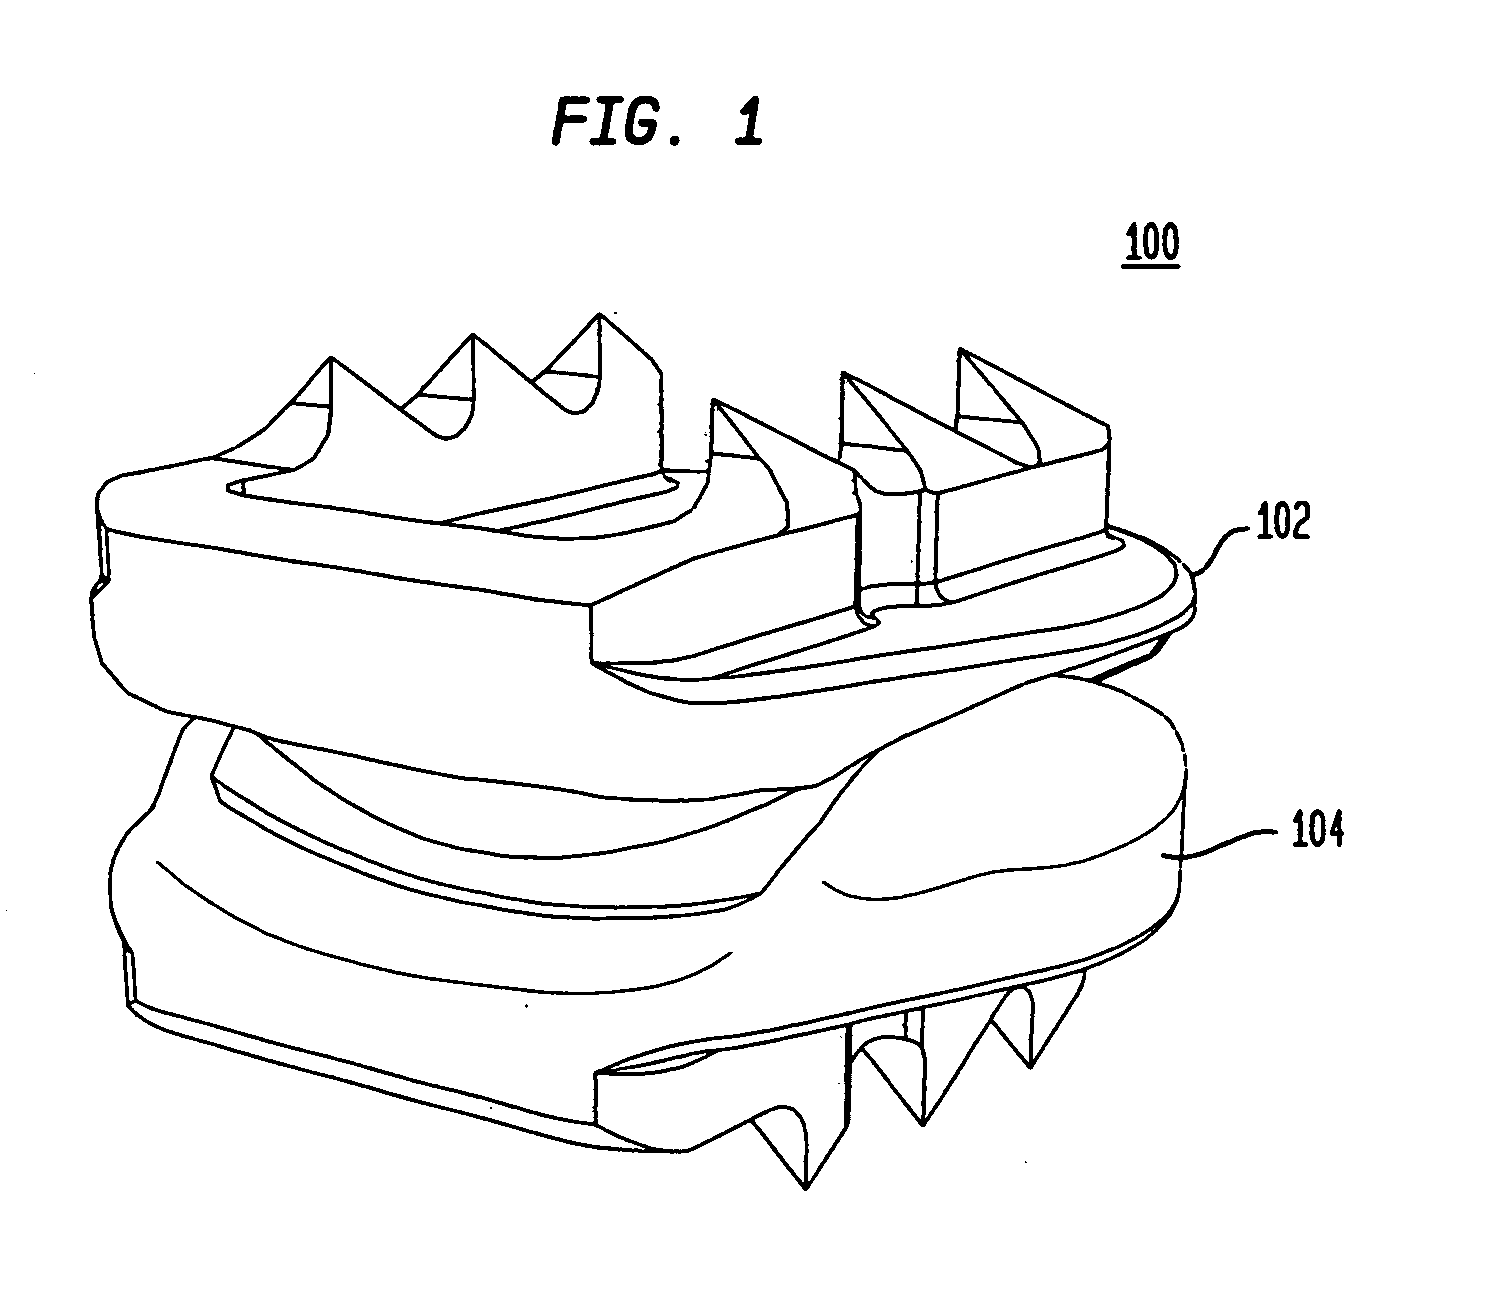 Instruments and methods for inserting artificial intervertebral implants